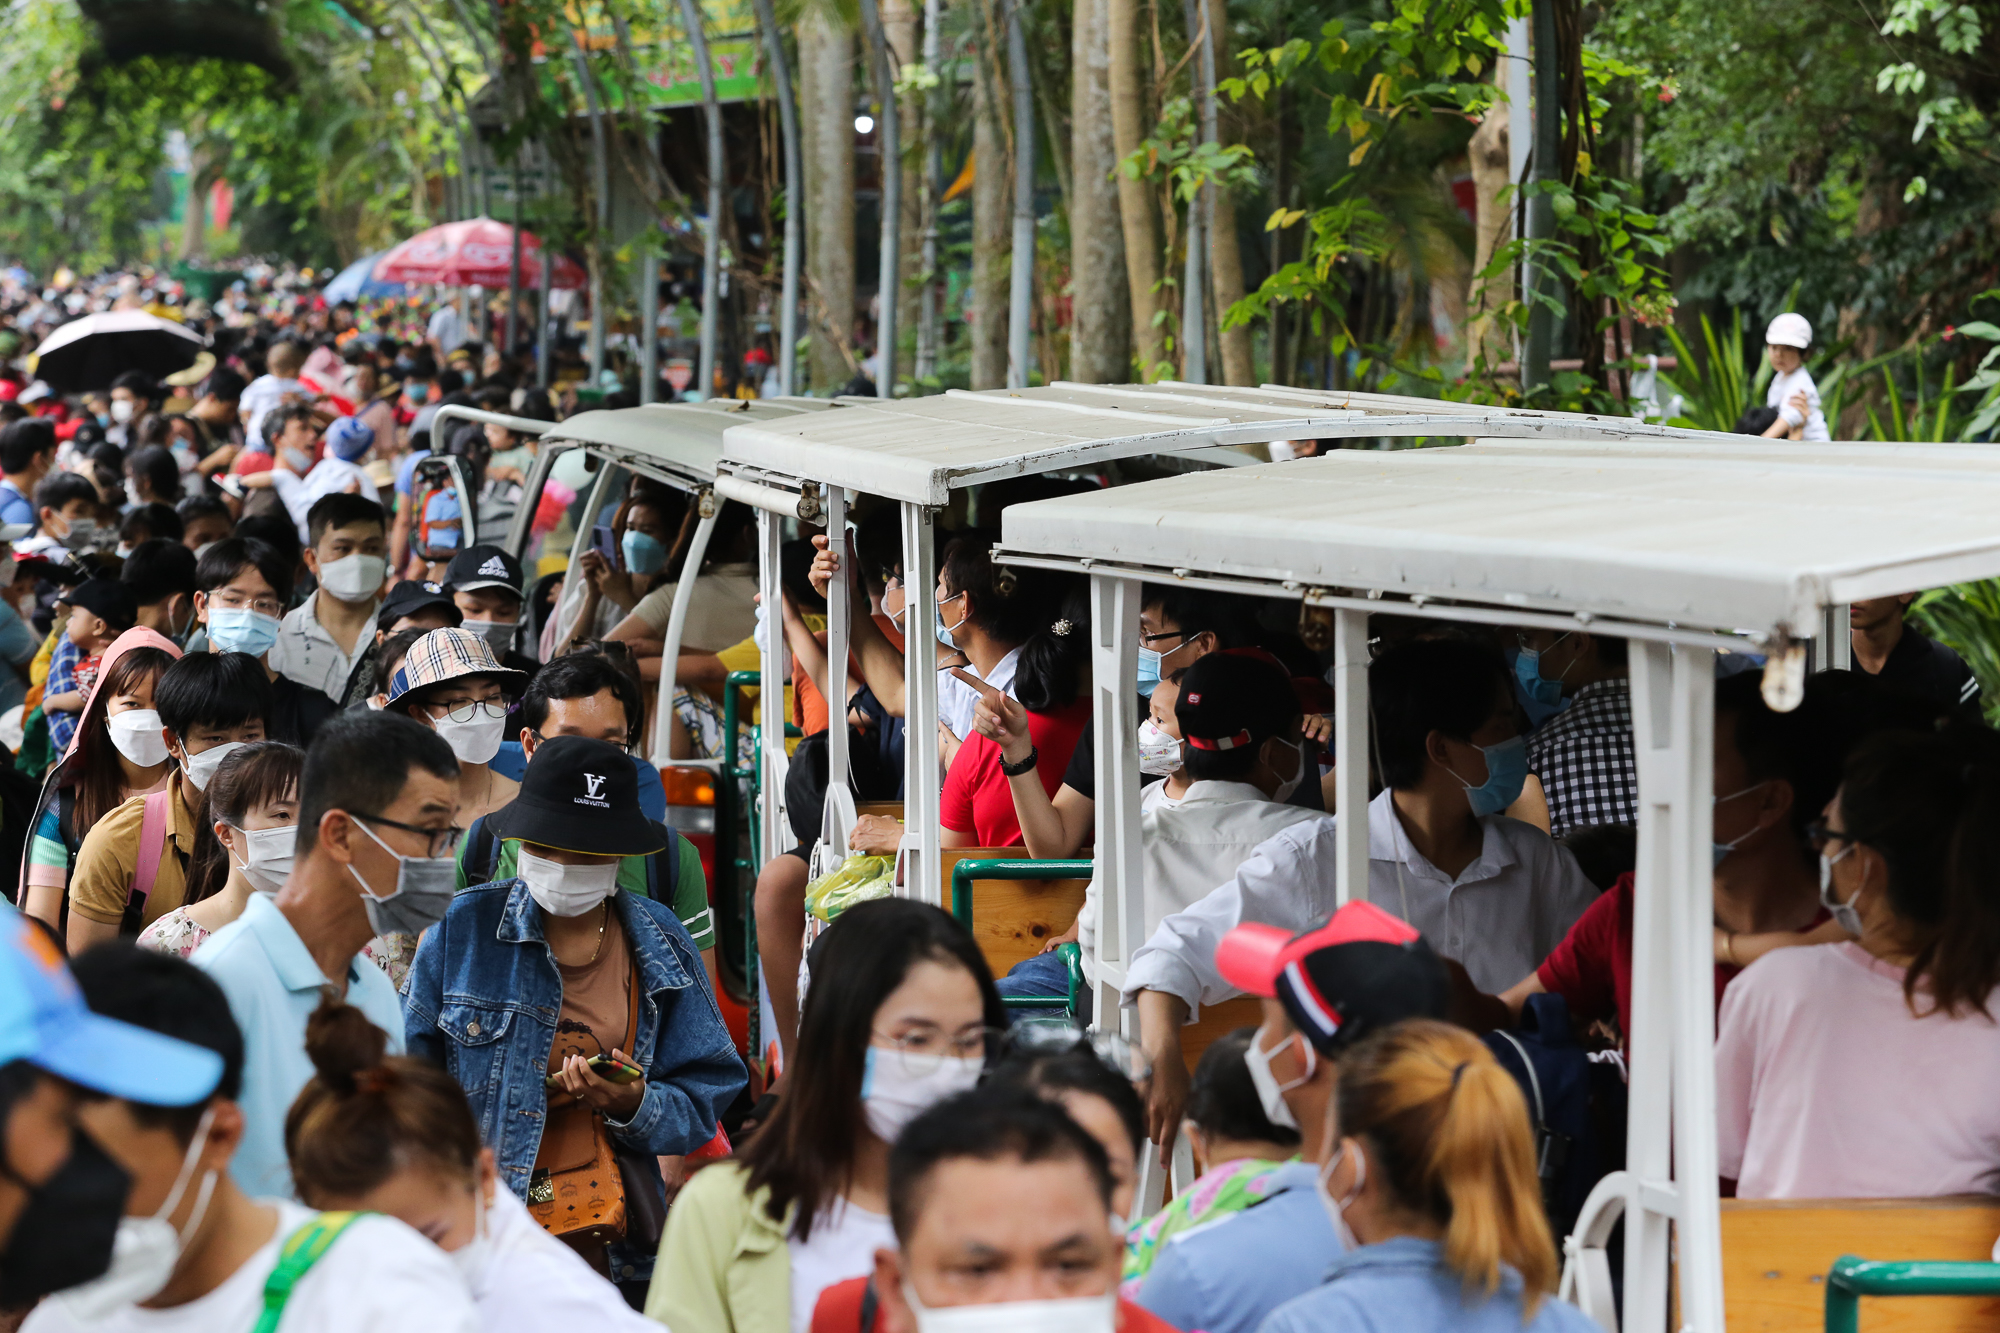 Saigon Zoo and Botanical Garden is crowded with people, guests bring suitcases to camp on the occasion of Hung King's death anniversary - Photo 9.